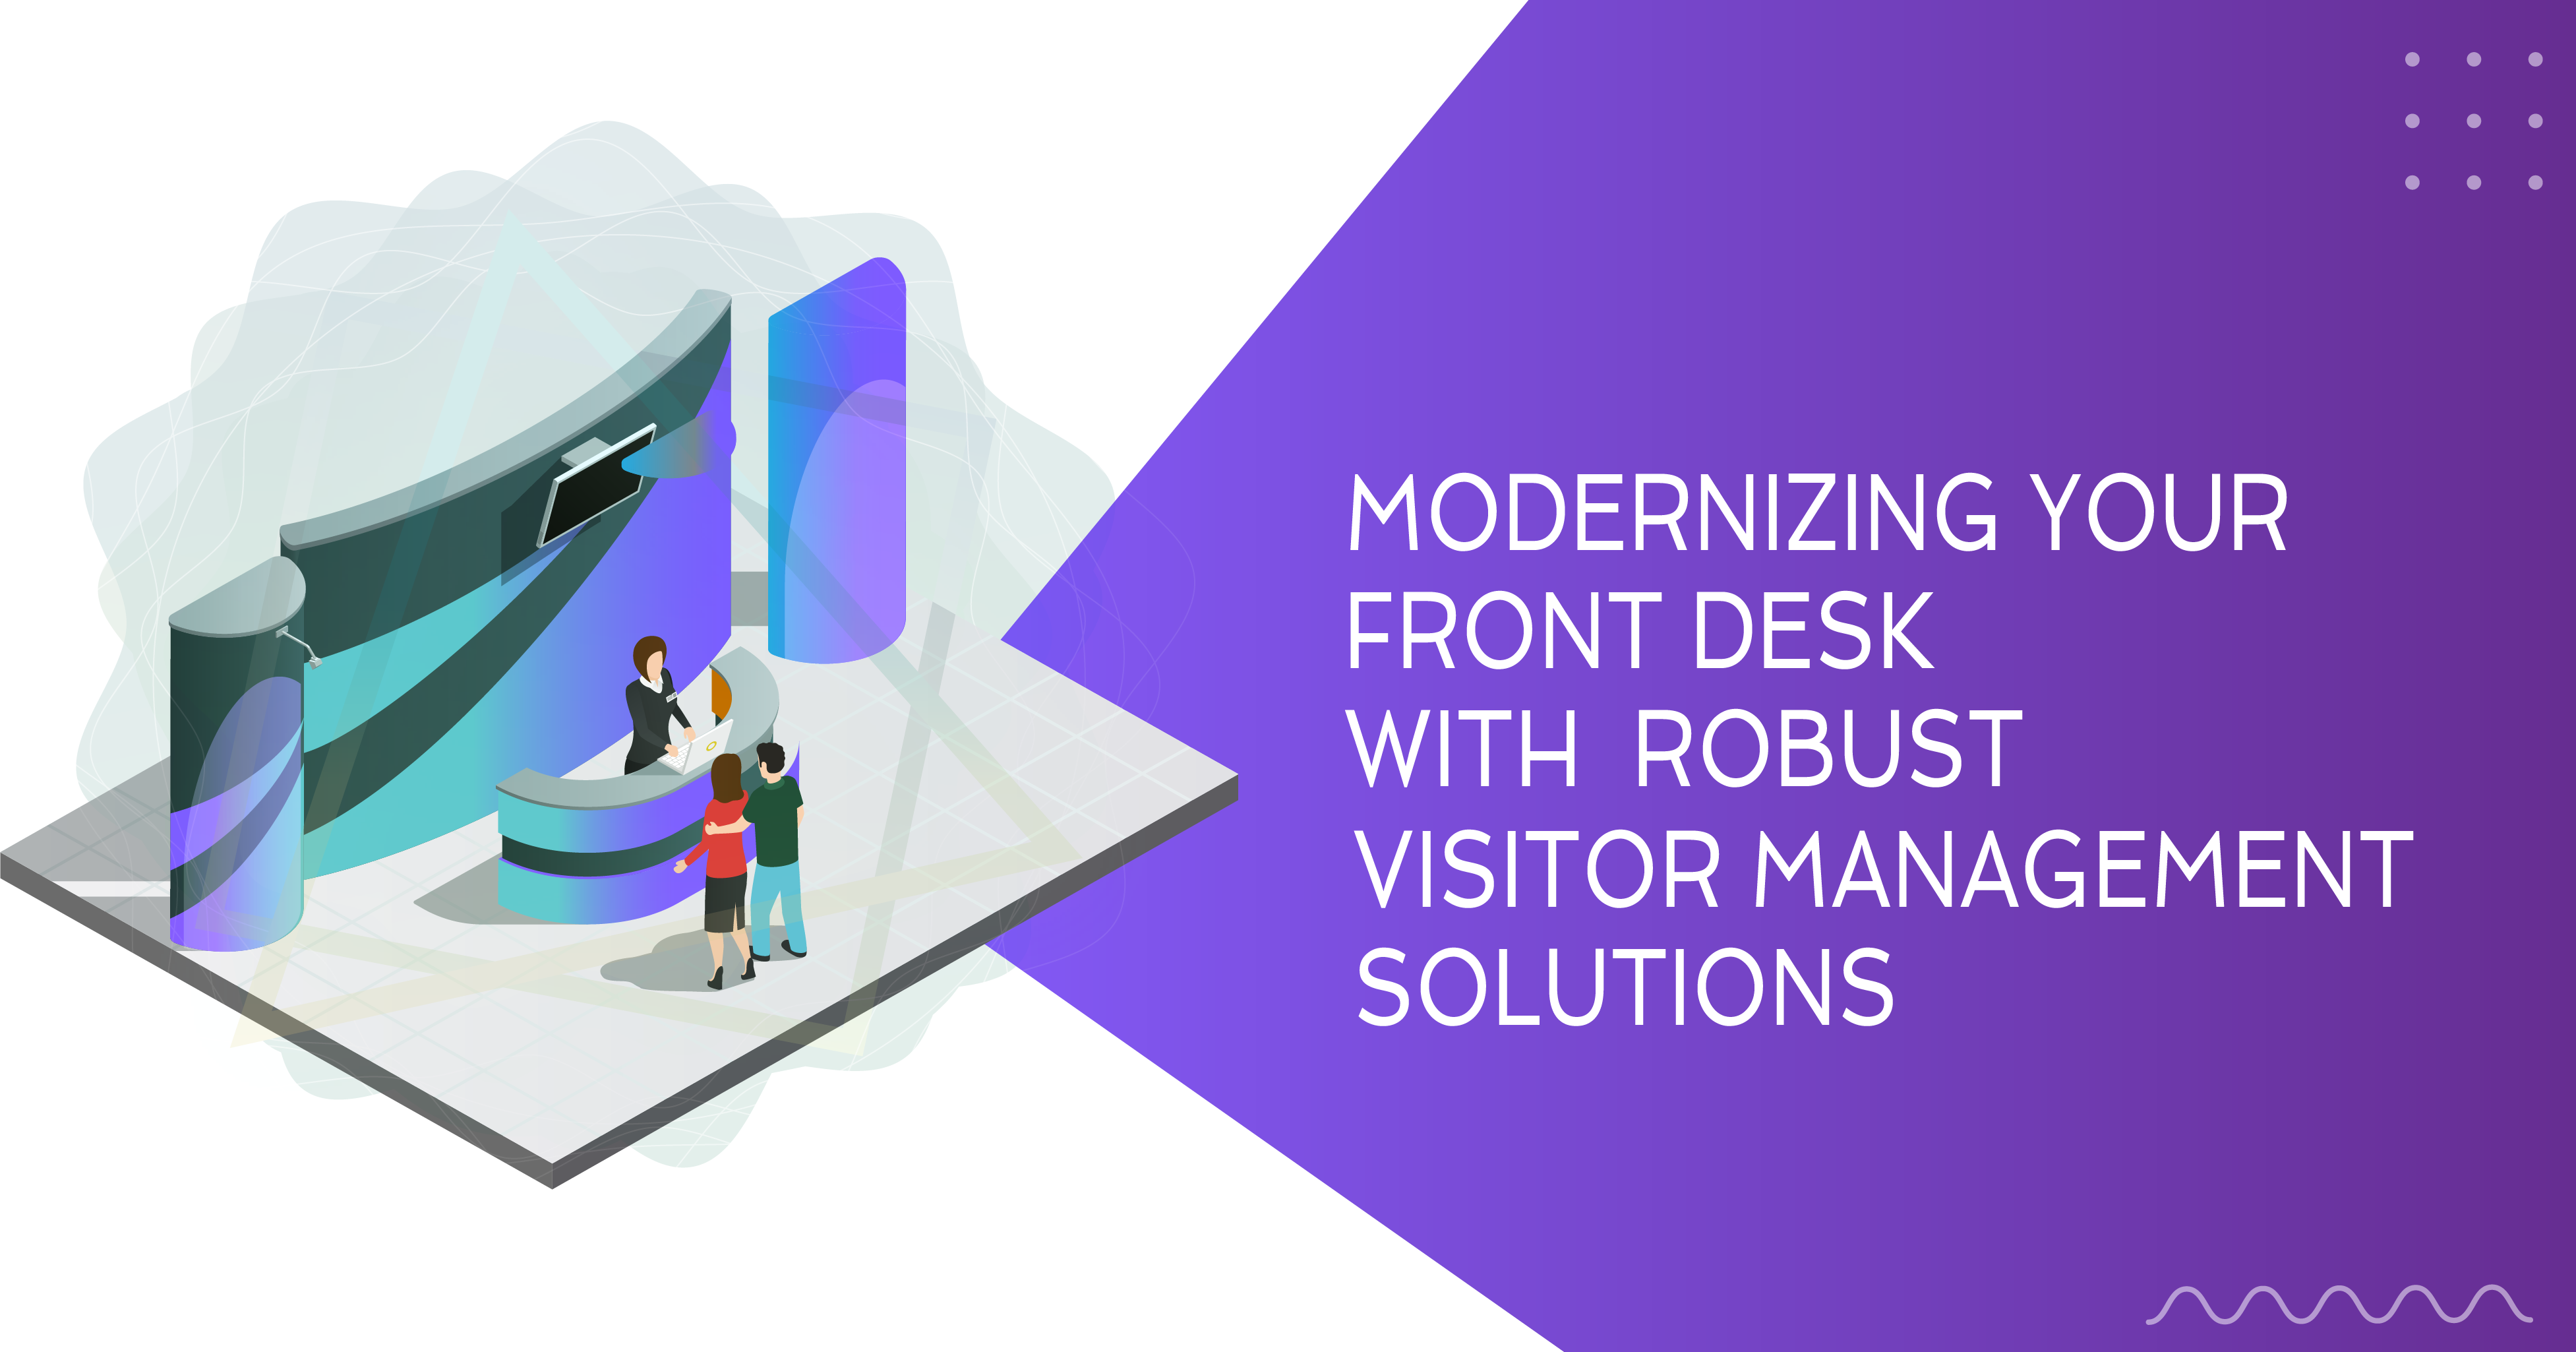 Modernizing Your Front Desk With Robust Visitor Management Solutions